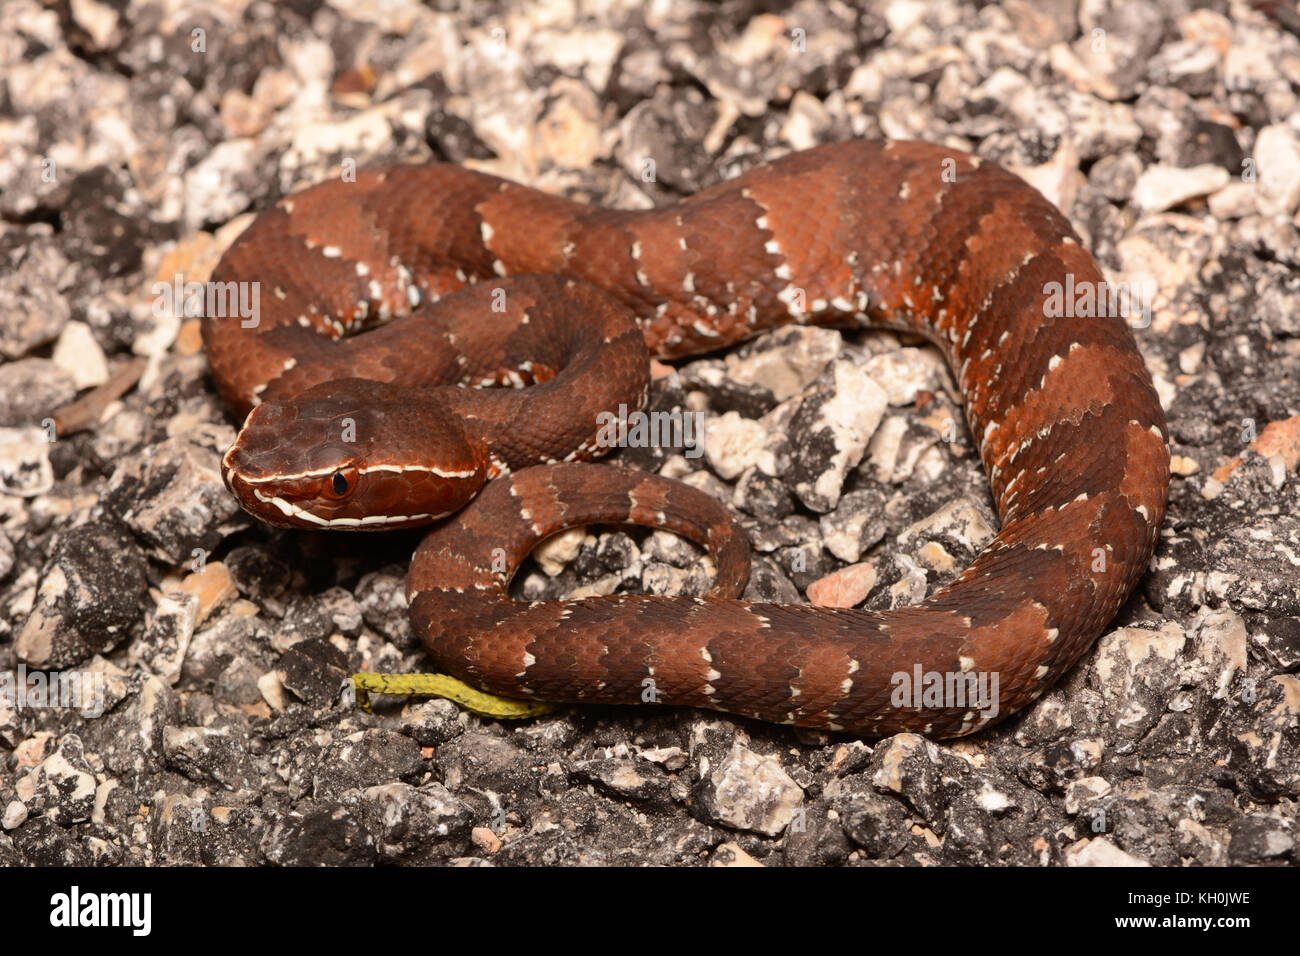 Yucatecan Cantil (Agkistrodon russeolus) from Campeche, México. Stock Photo